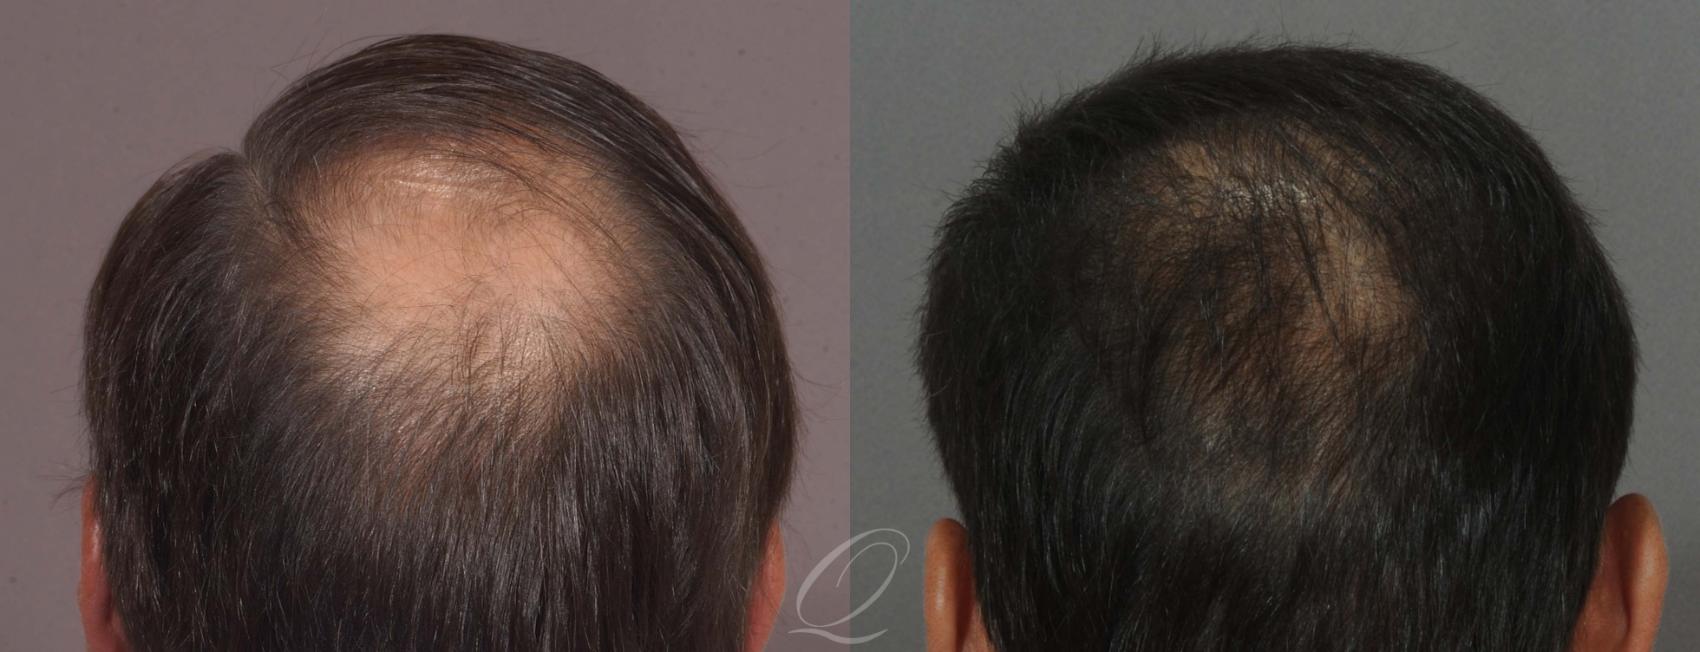 FUT Case 1029 Before & After View #5 | Rochester, Buffalo, & Syracuse, NY | Quatela Center for Hair Restoration